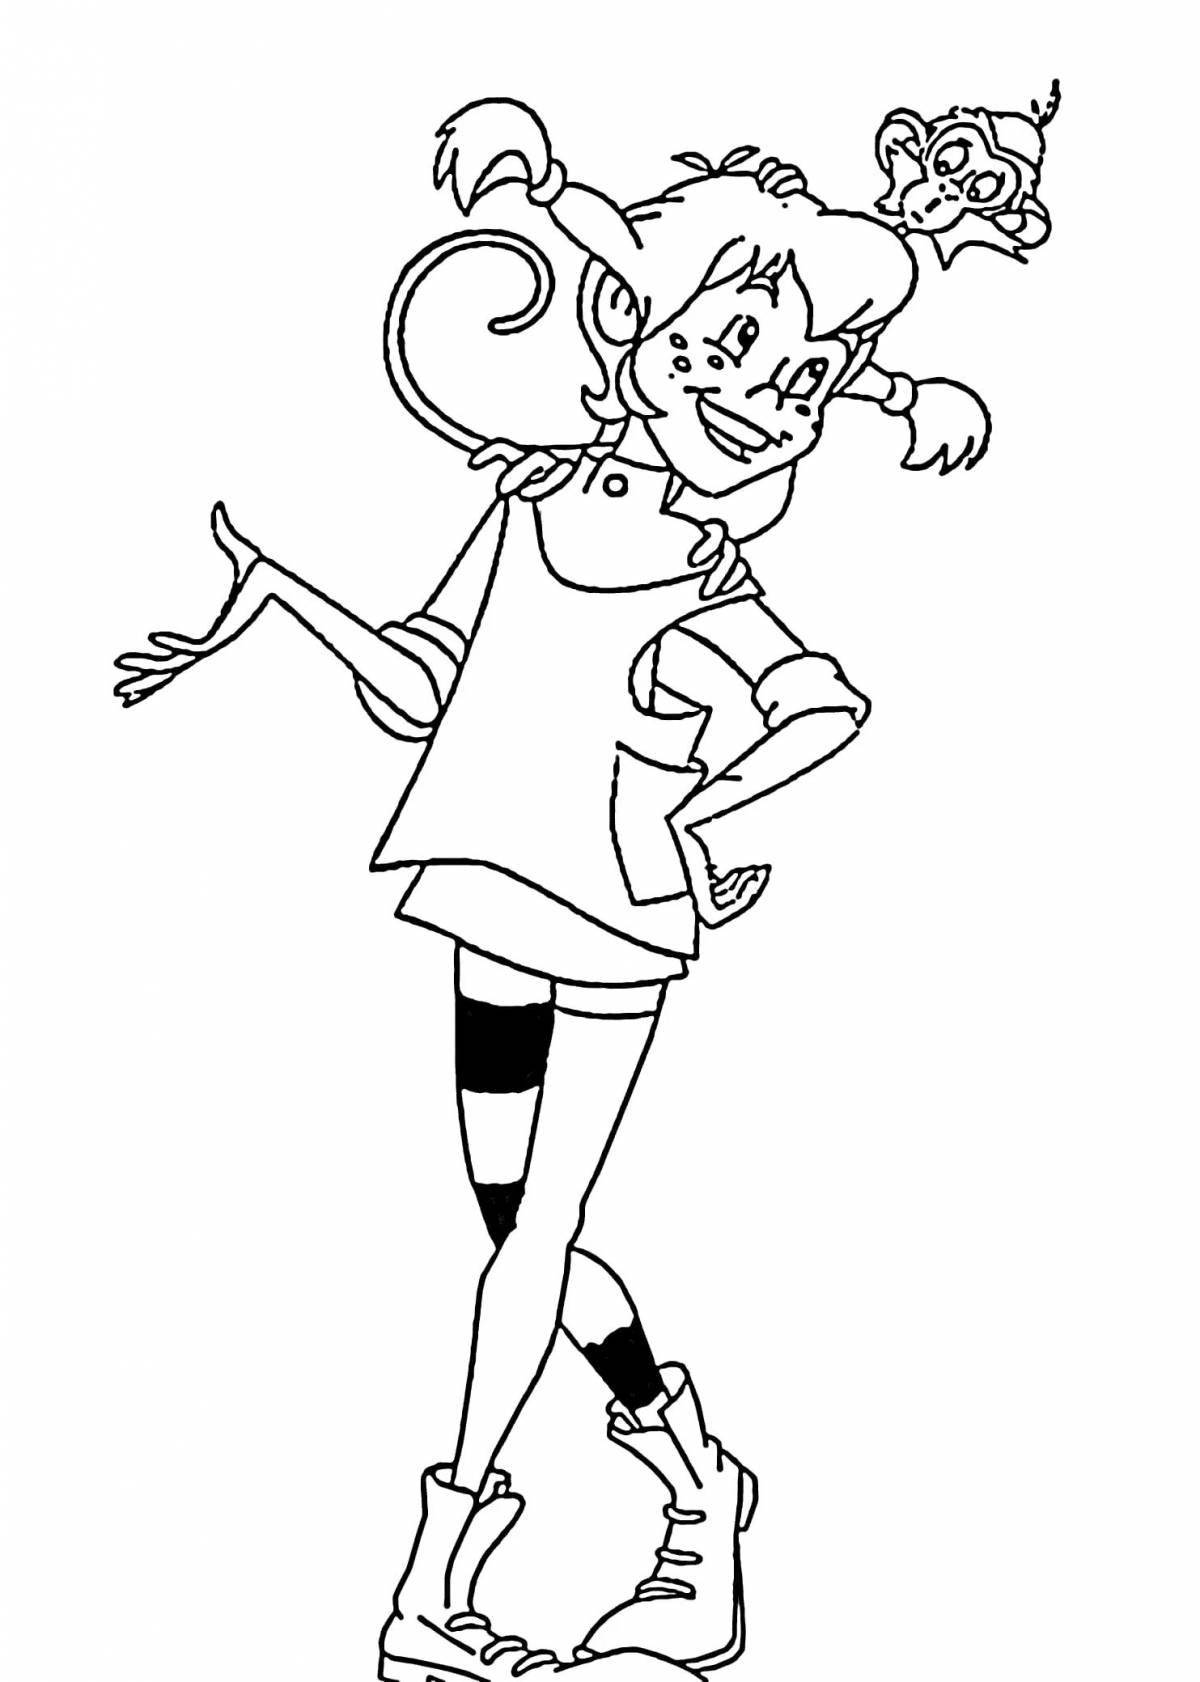 Animated pippi play time coloring page